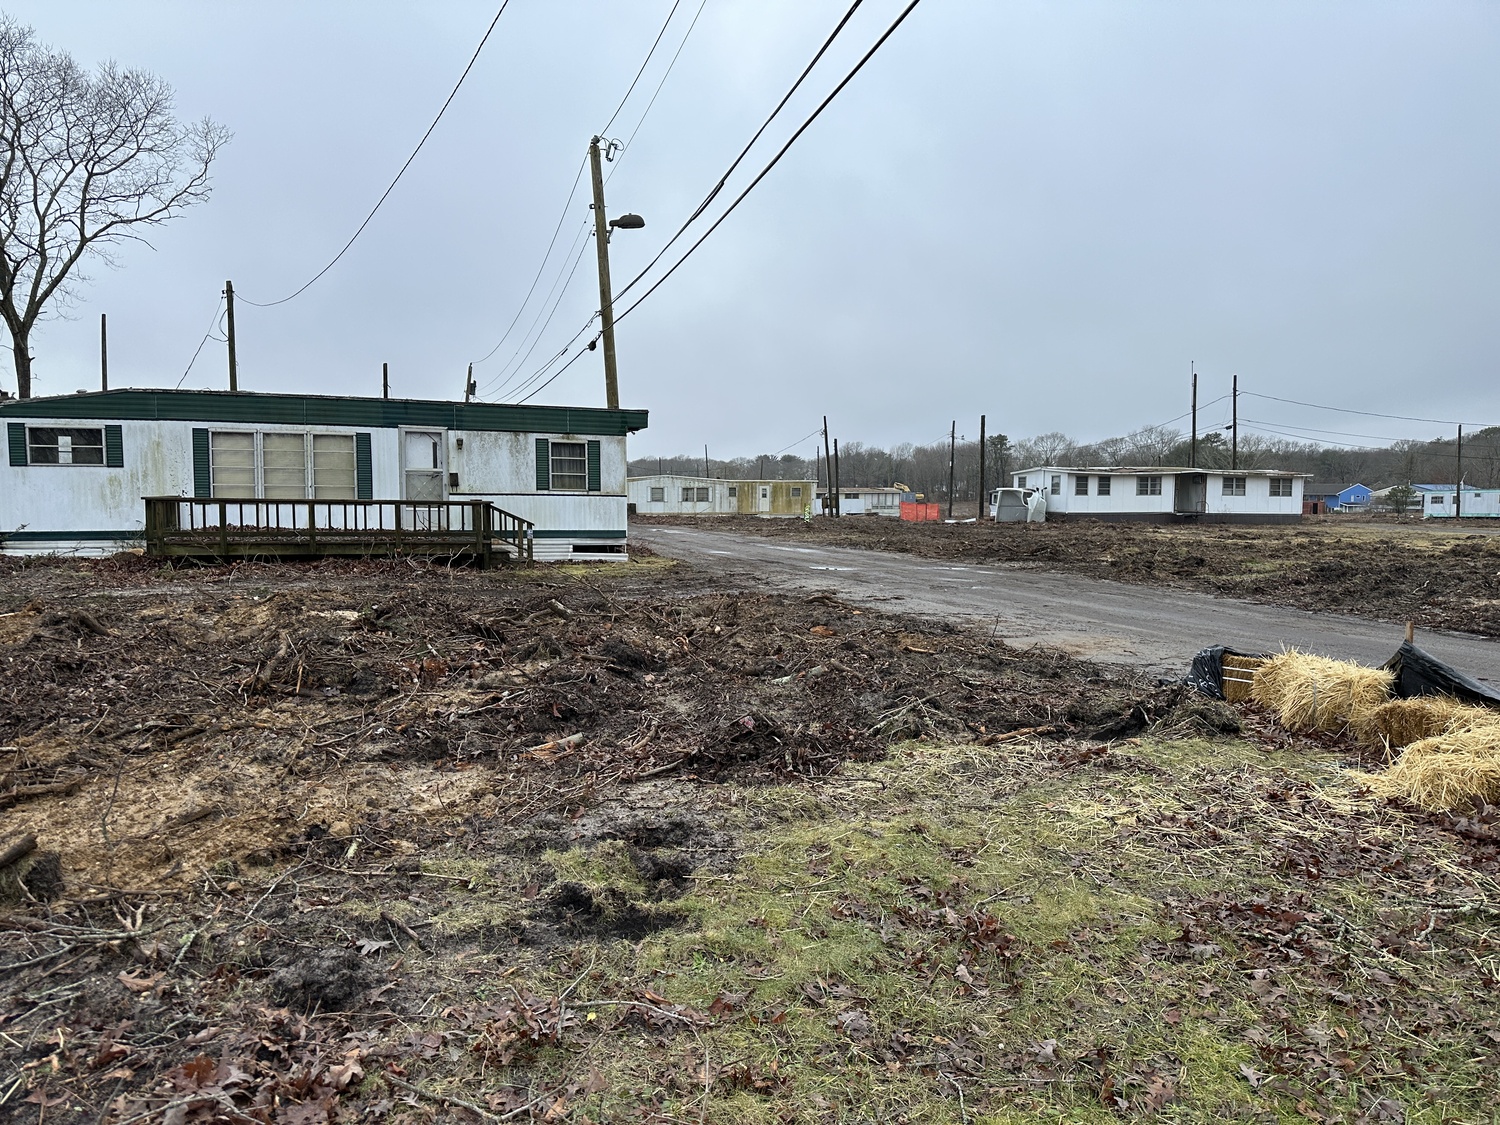 Tree removal has exposed the mobile home park site off Old Country Road in Eastport.  BRENDAN J. O'REILLY